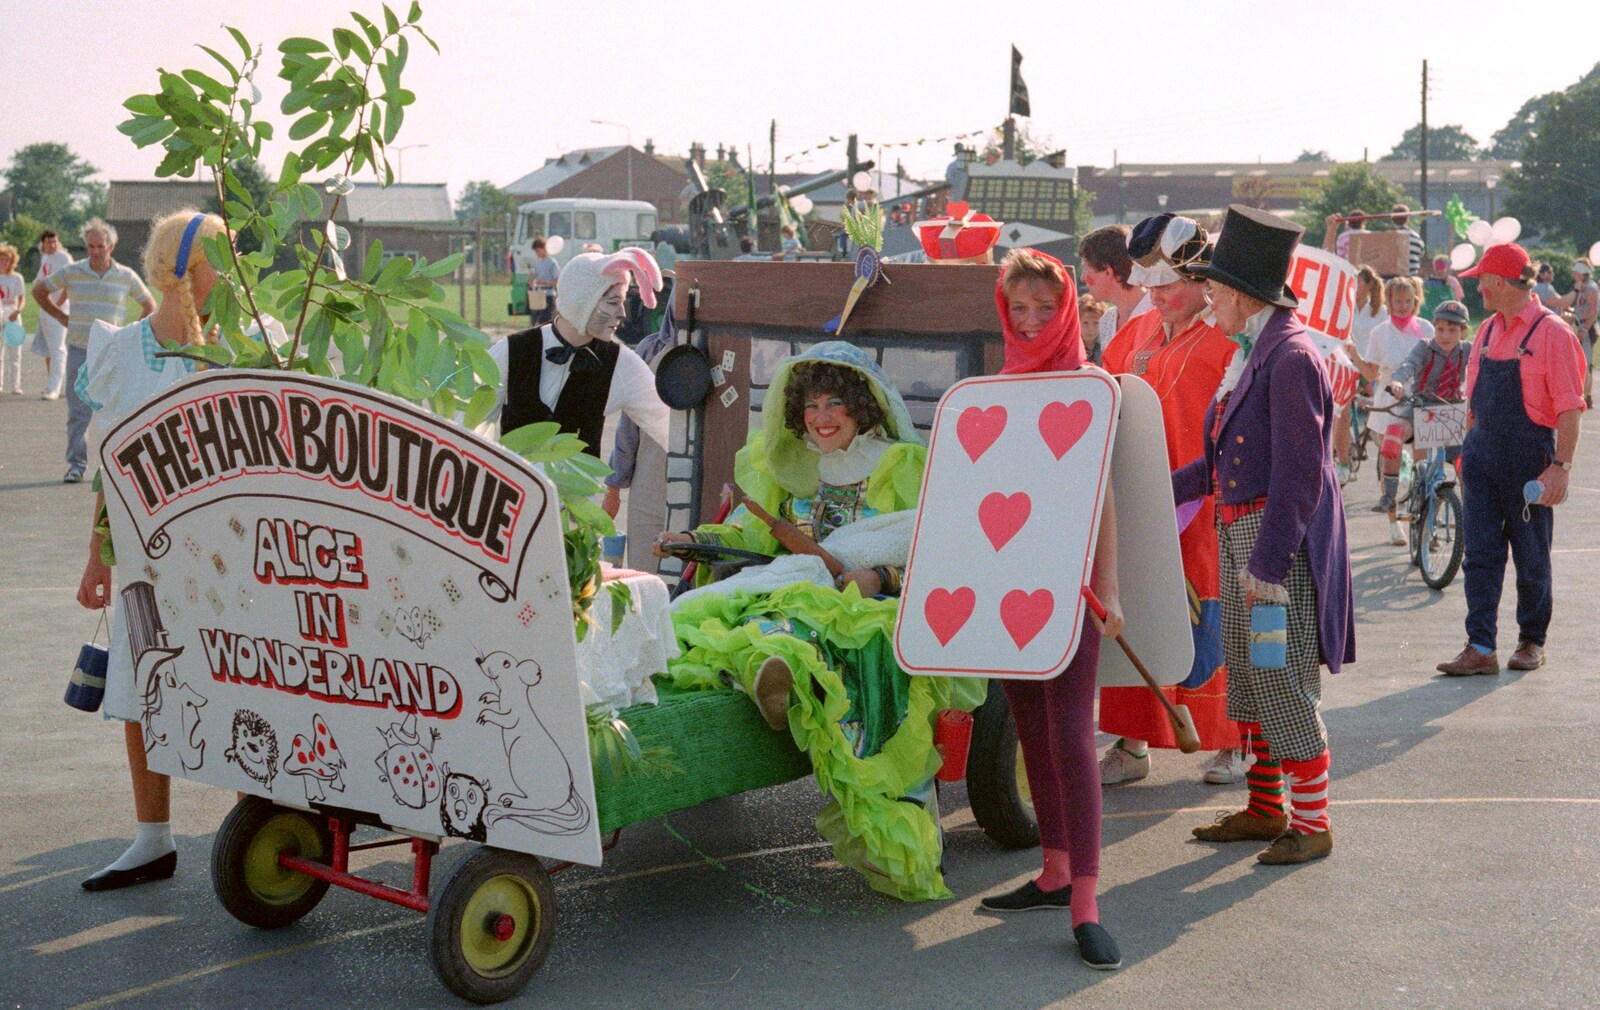 Hair Boutique's 'Alice in Wonderland' float from Sean and the New Milton Carnival, Hampshire - 1st August 1986